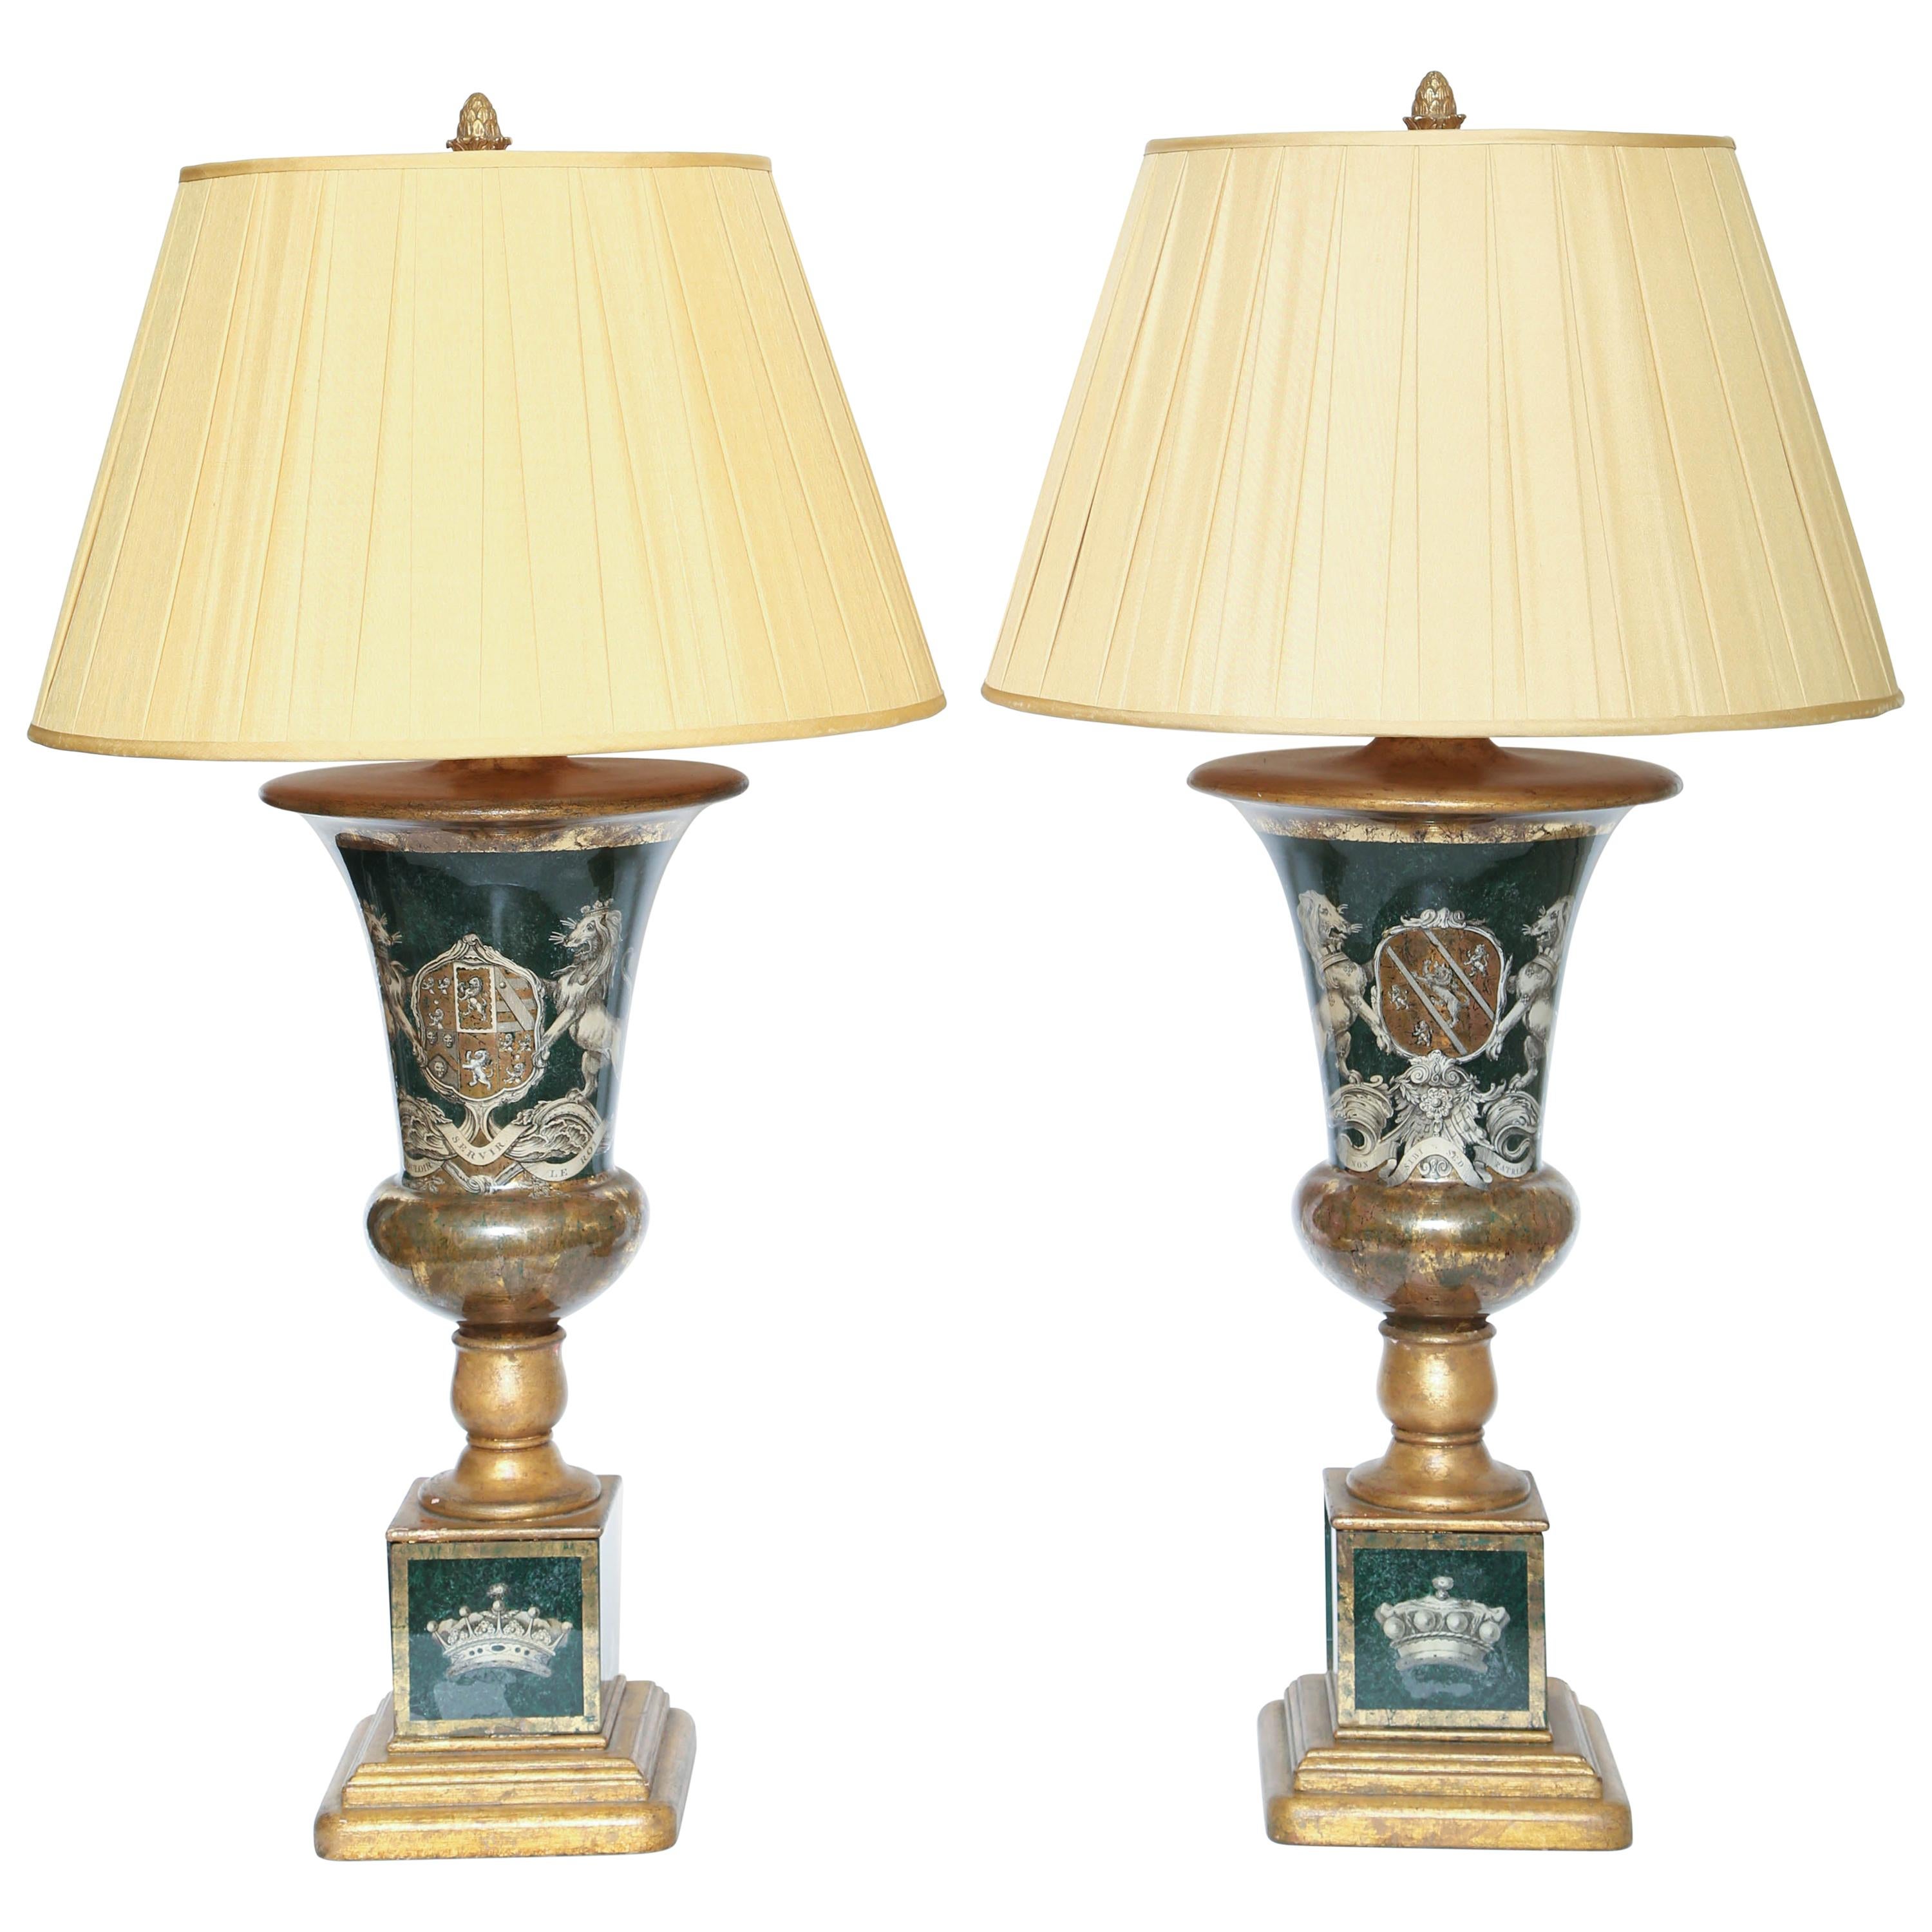 Stunning Pair of Vintage Decalcomania Armorial Lamps